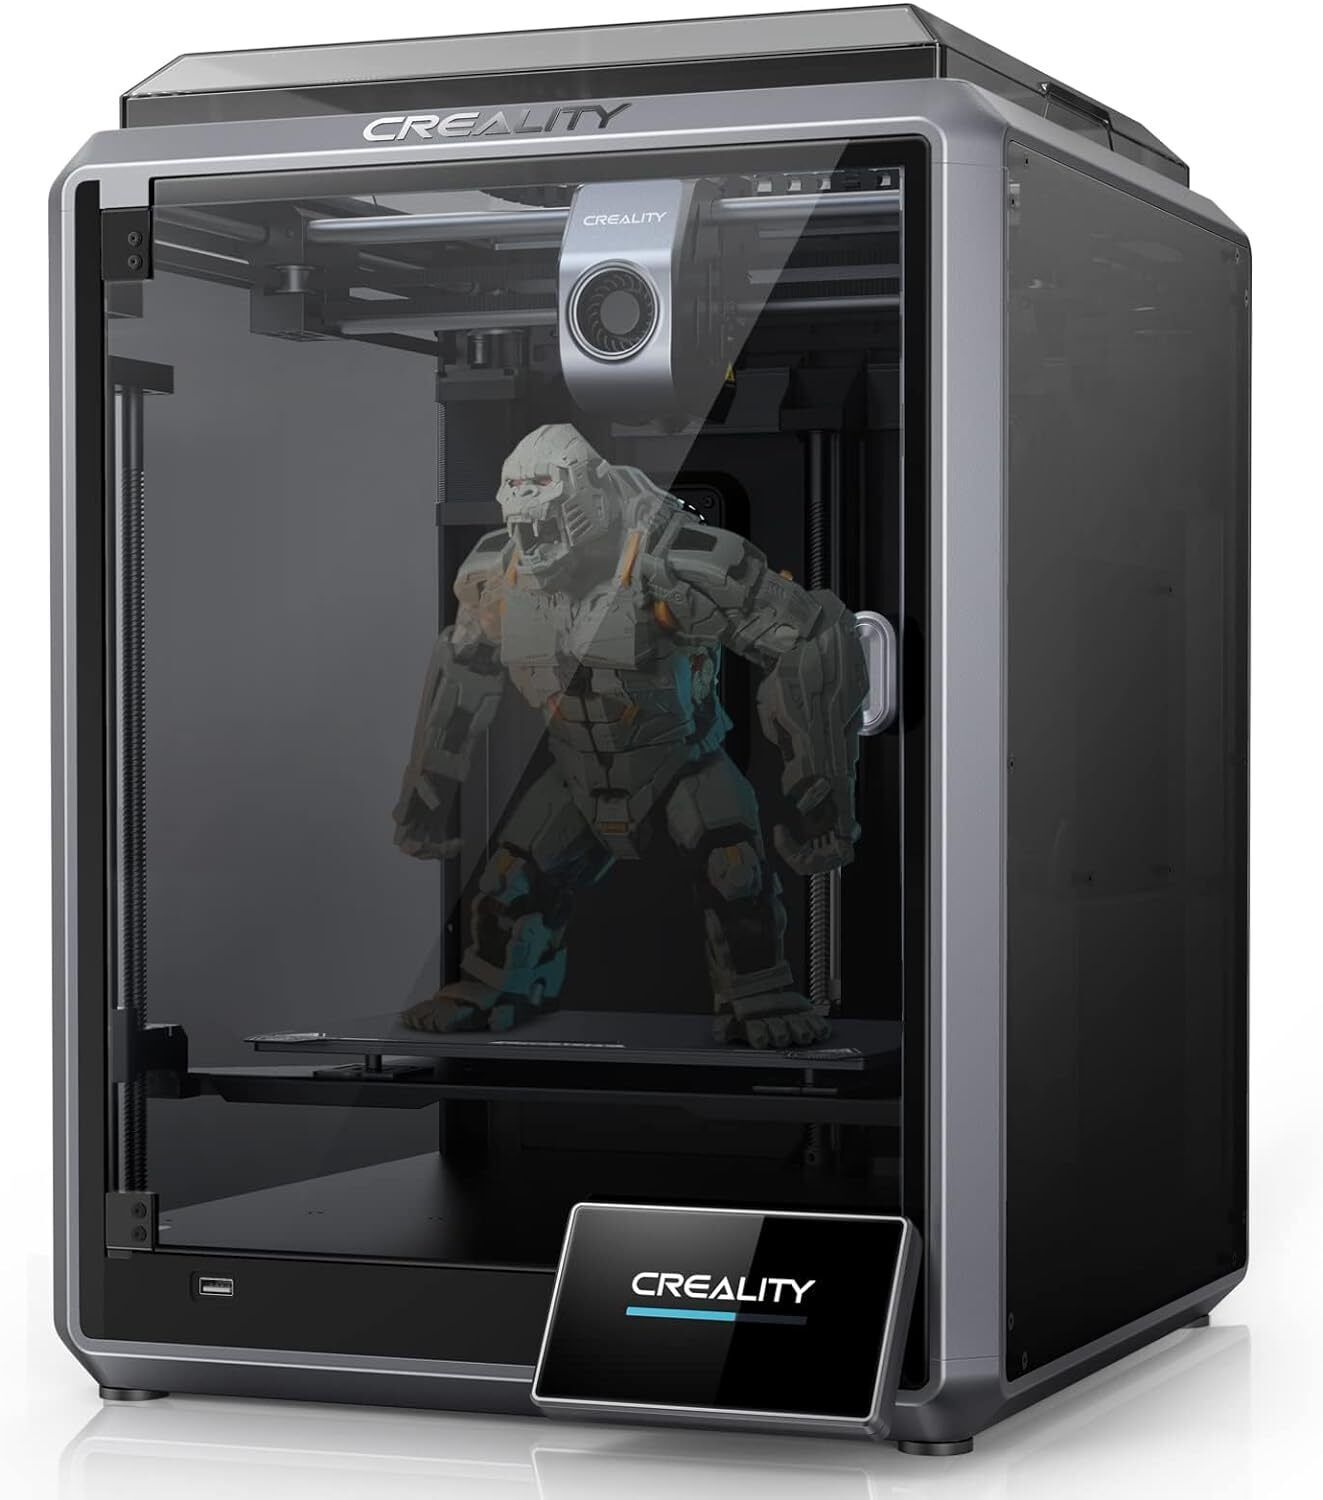 Creality K1 All-in-One 3D Printer with 600mm/s Printing Speed - Silver-Black